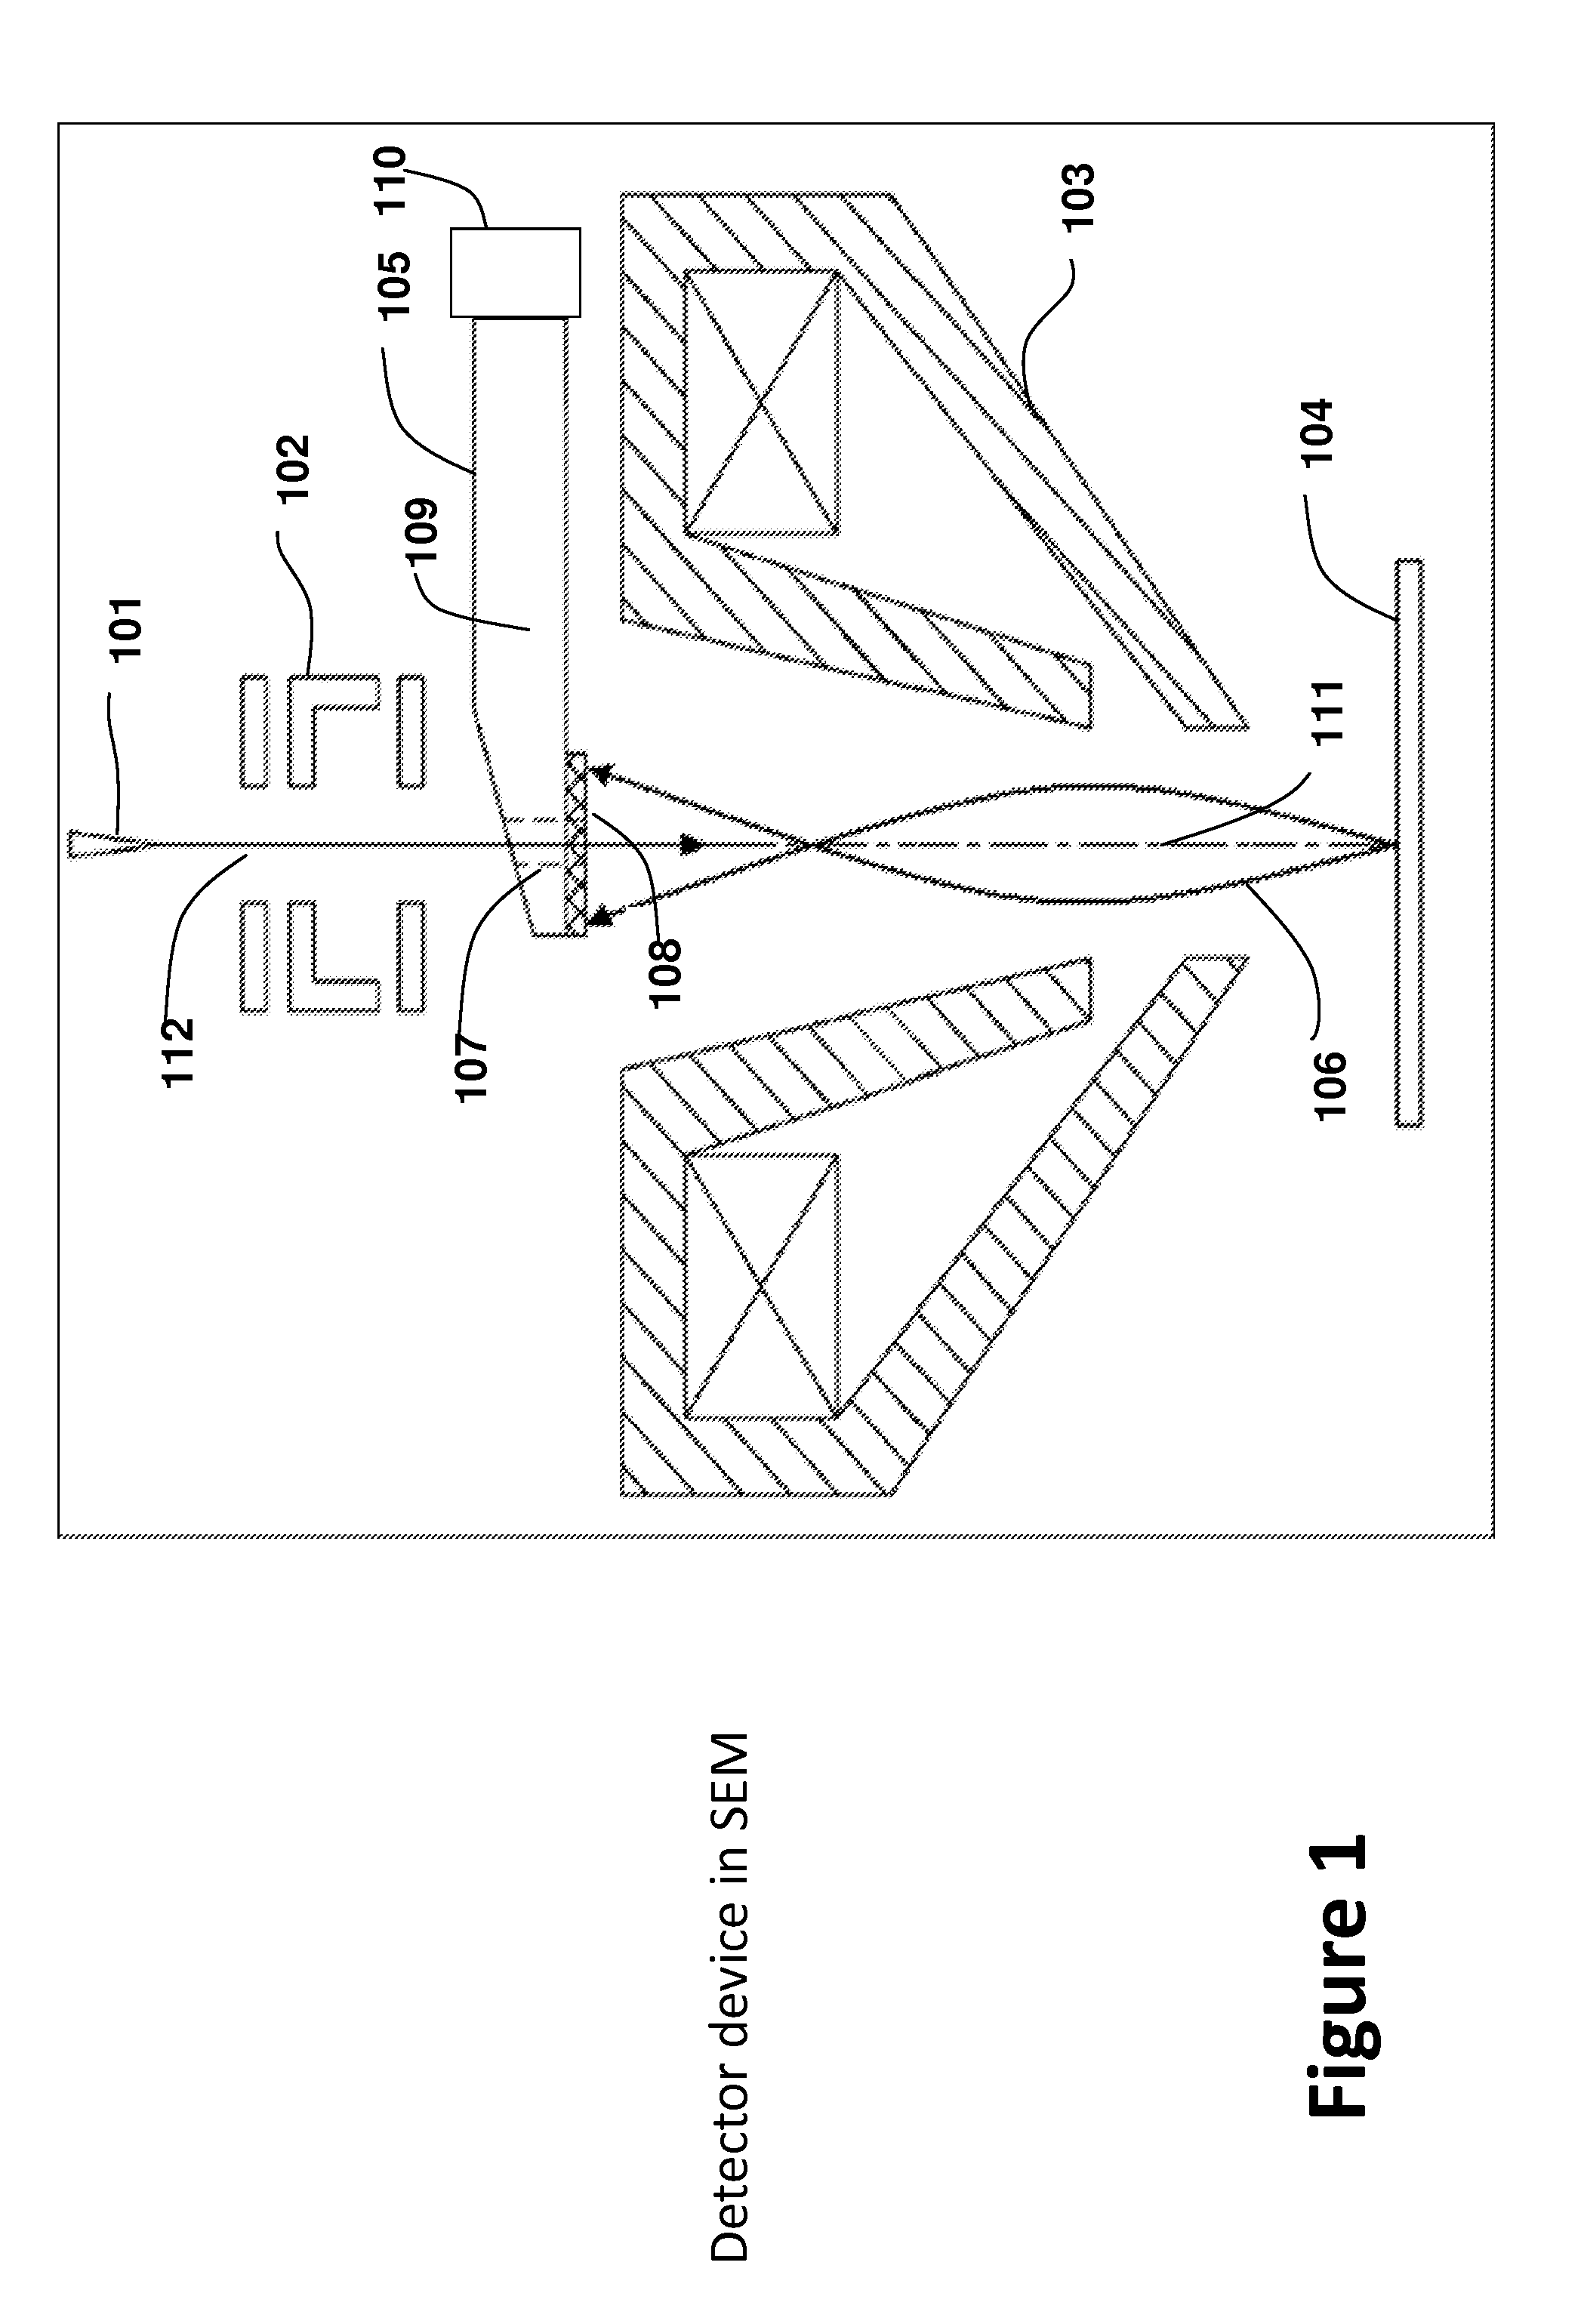 High efficiency secondary and back scattered electron detector